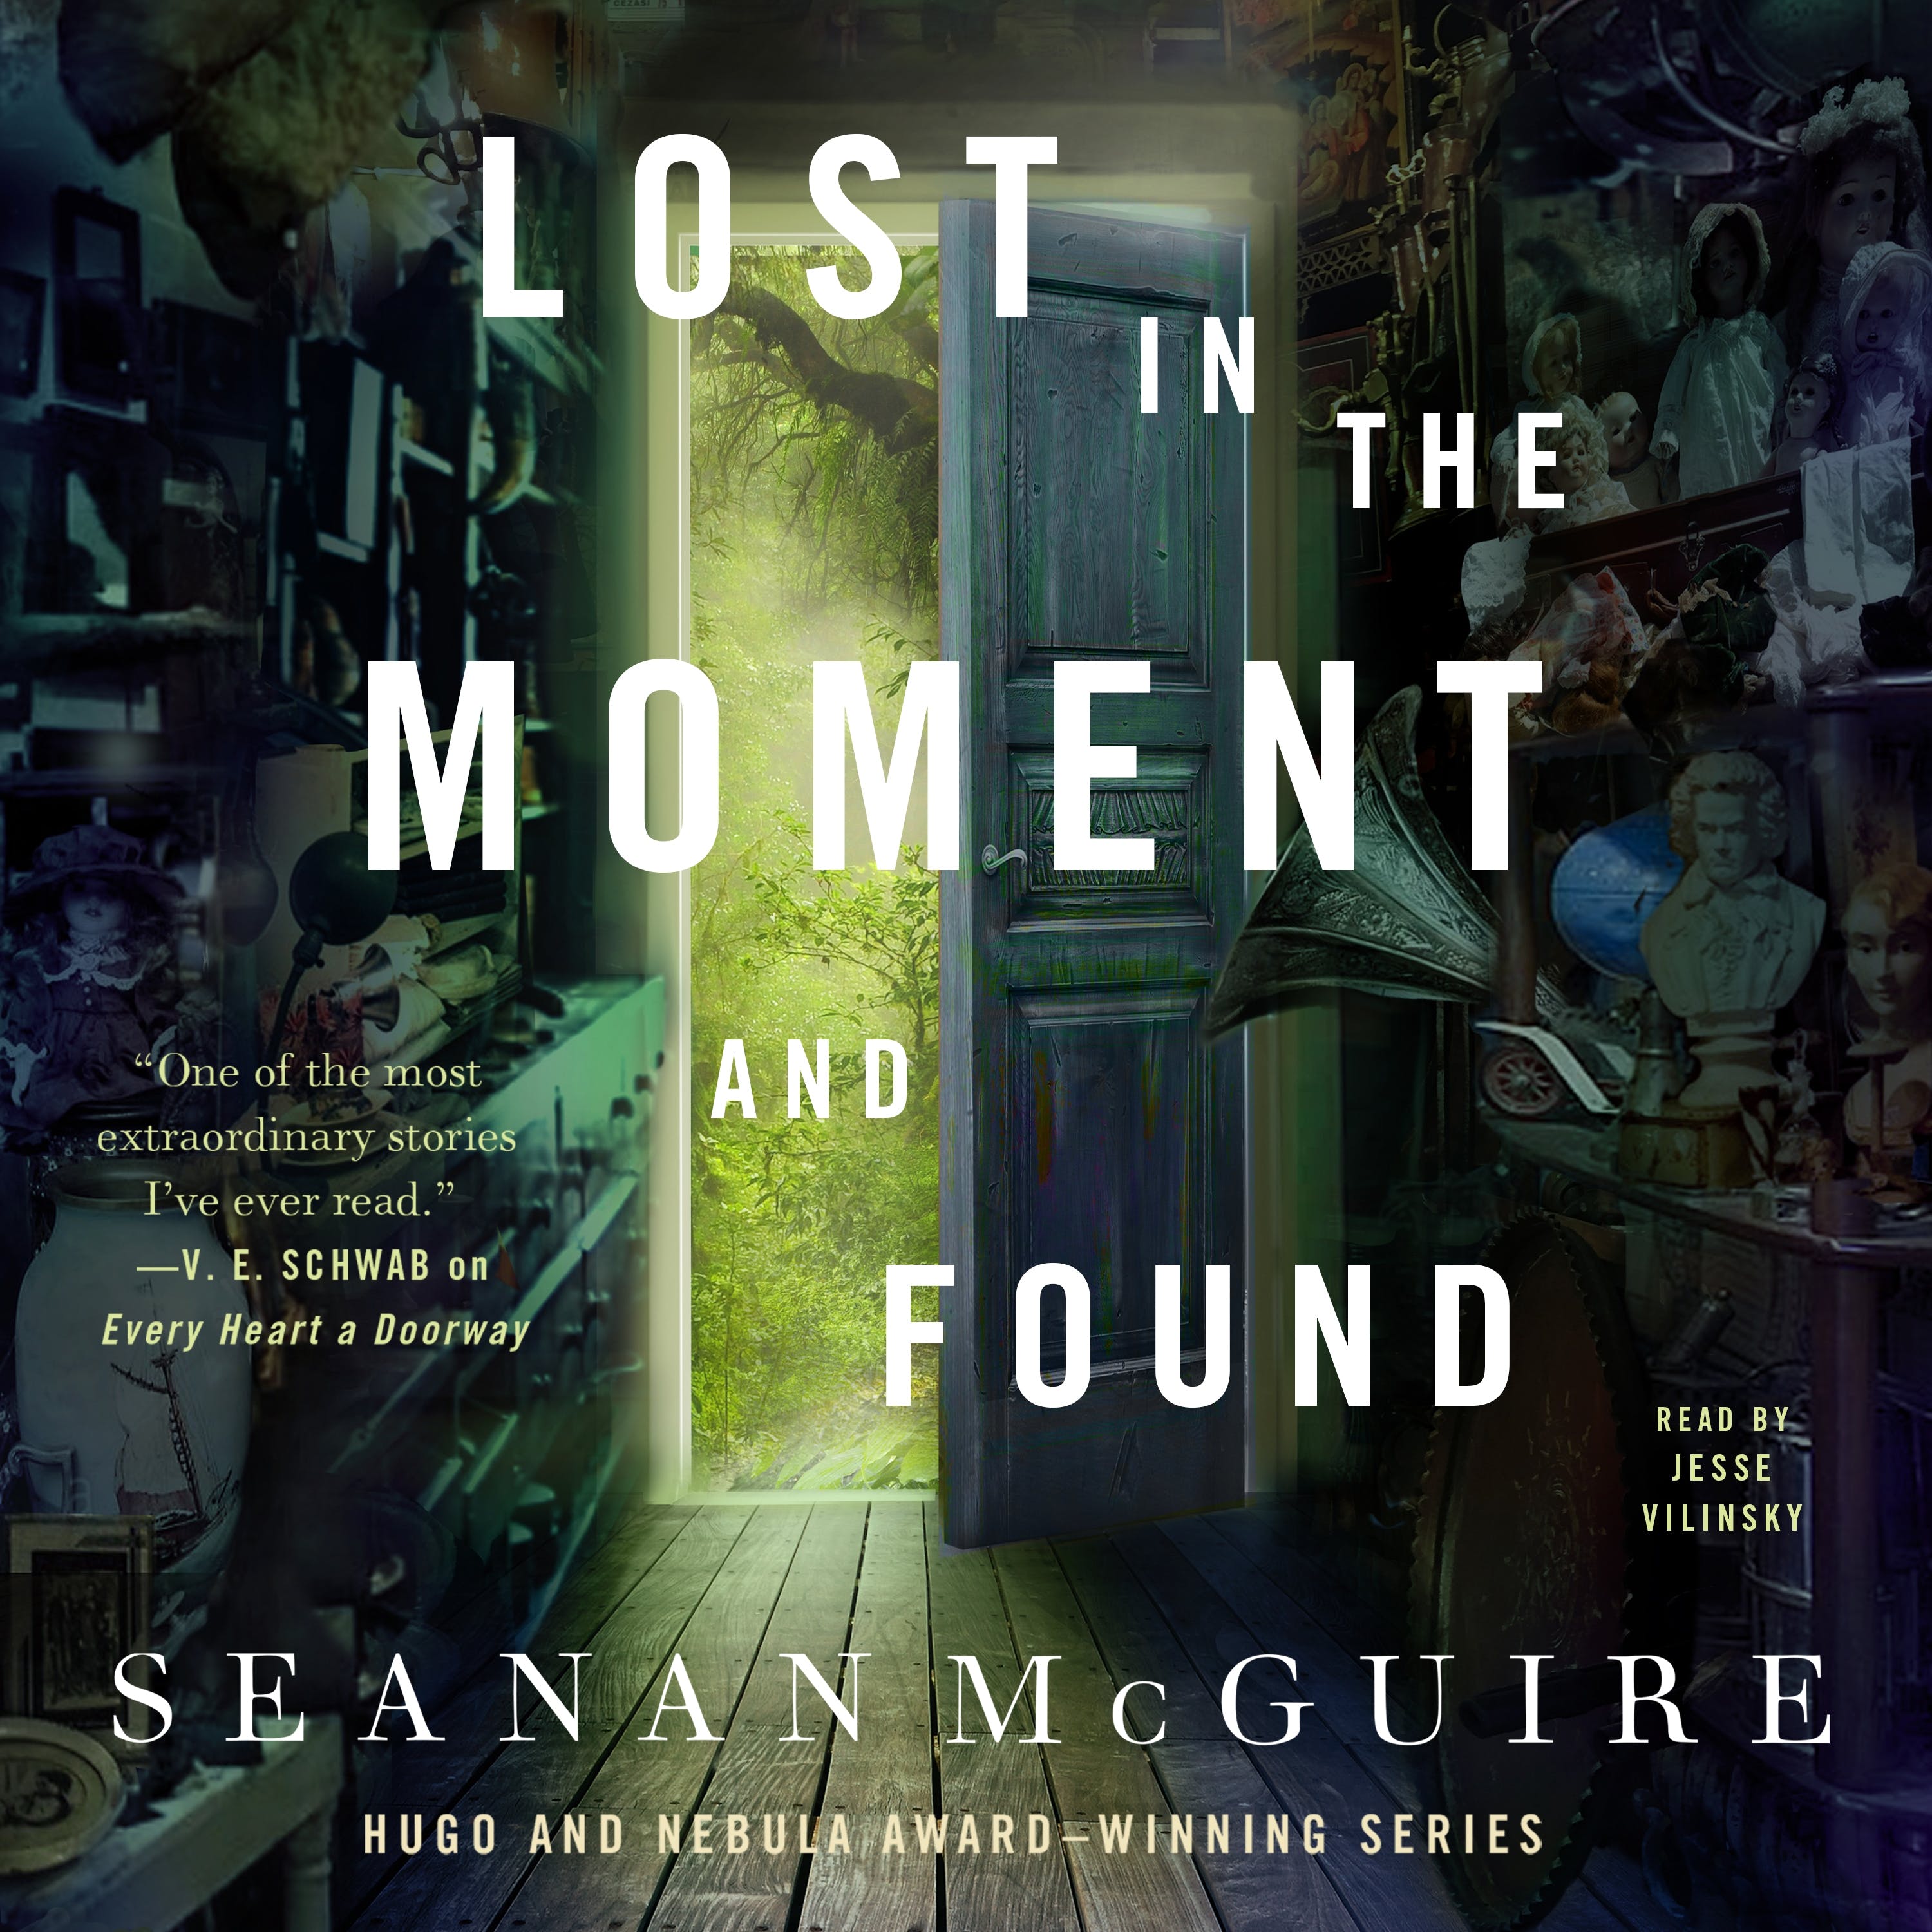 Seanan McGuire: Lost in the Moment and Found (AudiobookFormat)